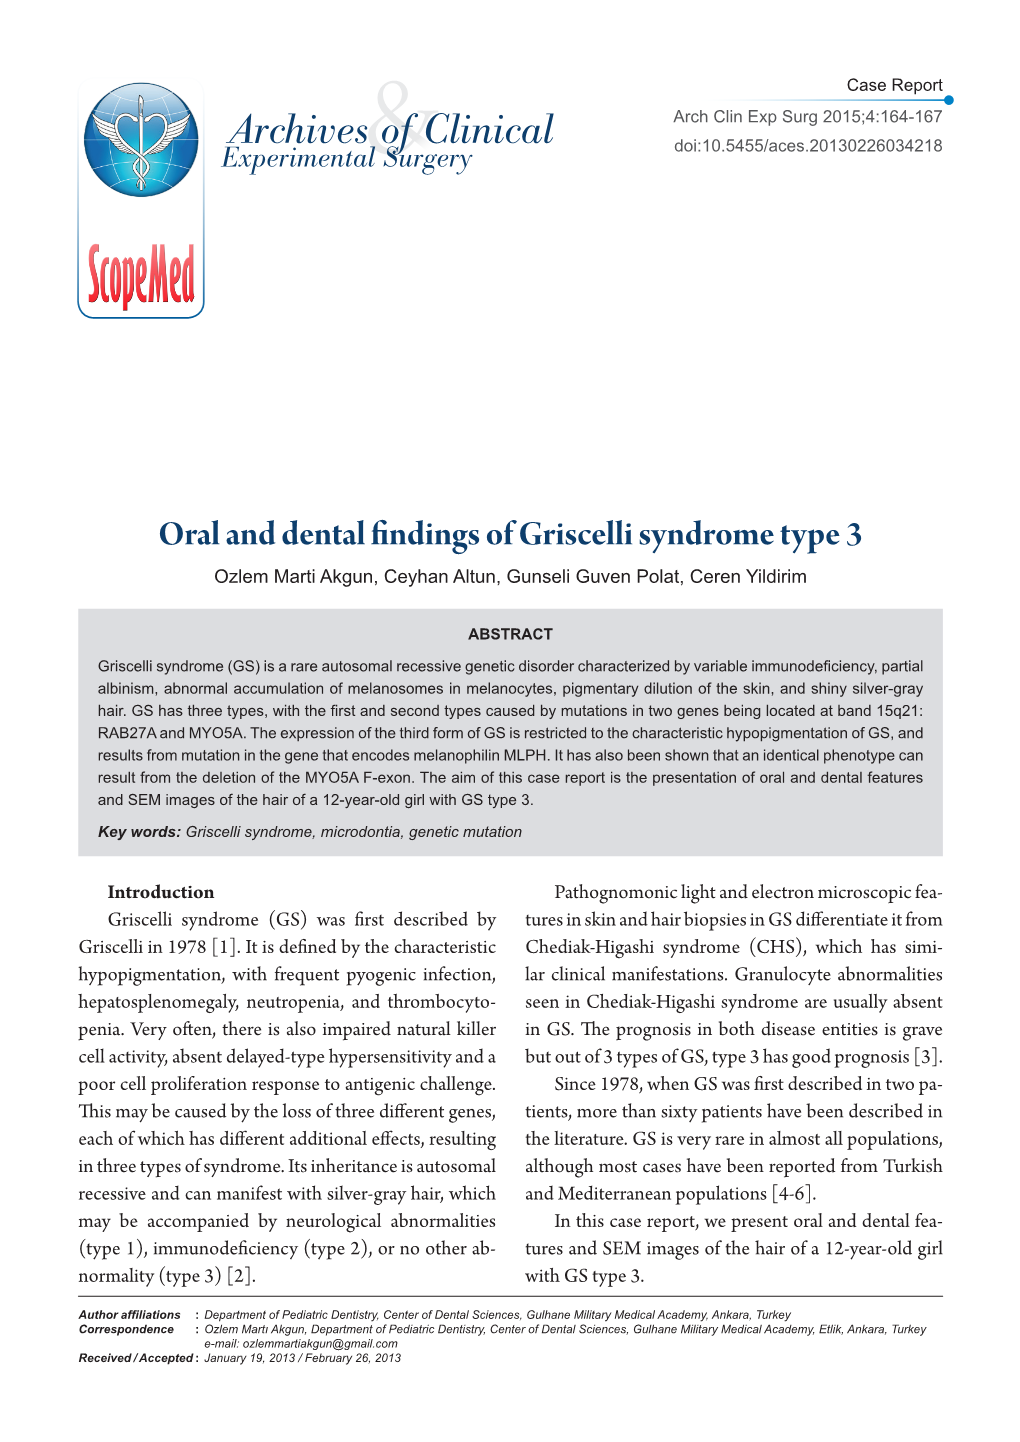 Oral and Dental Findings of Griscelli Syndrome Type 3